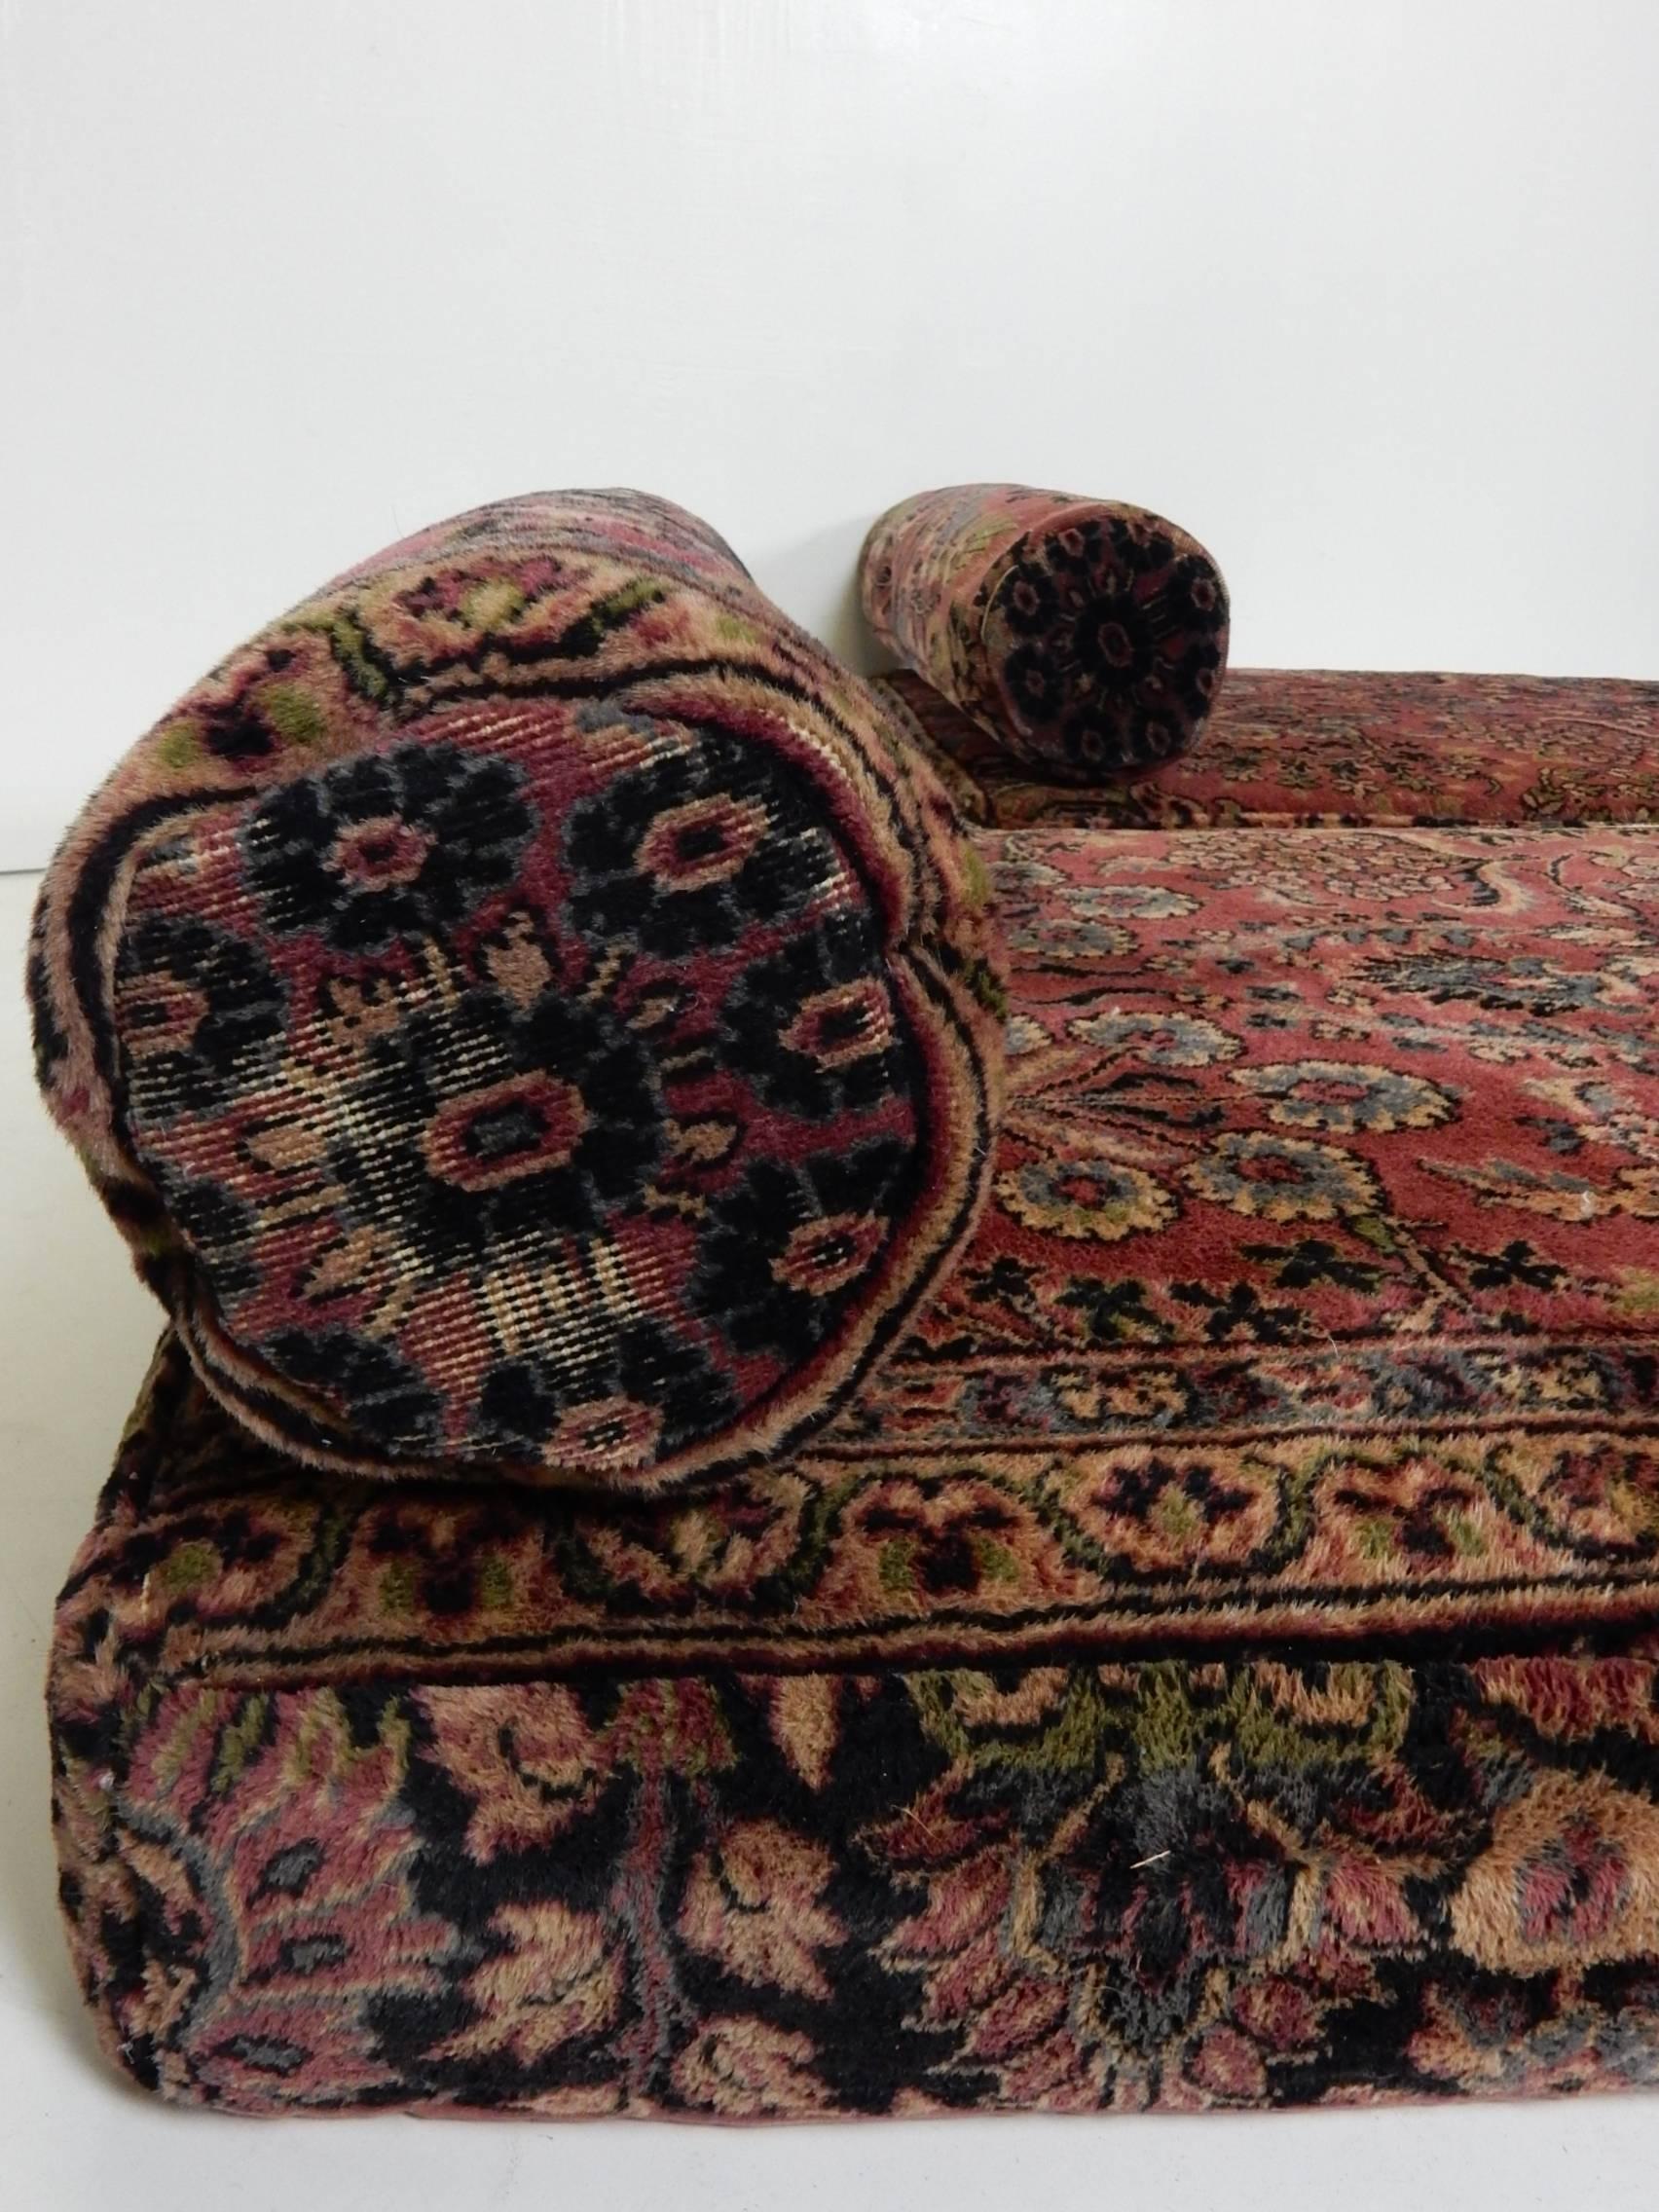 Antique Persian rug upholstered cushions with matching bolsters.
Fine quality wool rug with gorgeous colors and detail adroitly split and sewn to match perfectly together.
Bolsters also line up in a continuation of the pattern.
They each measure